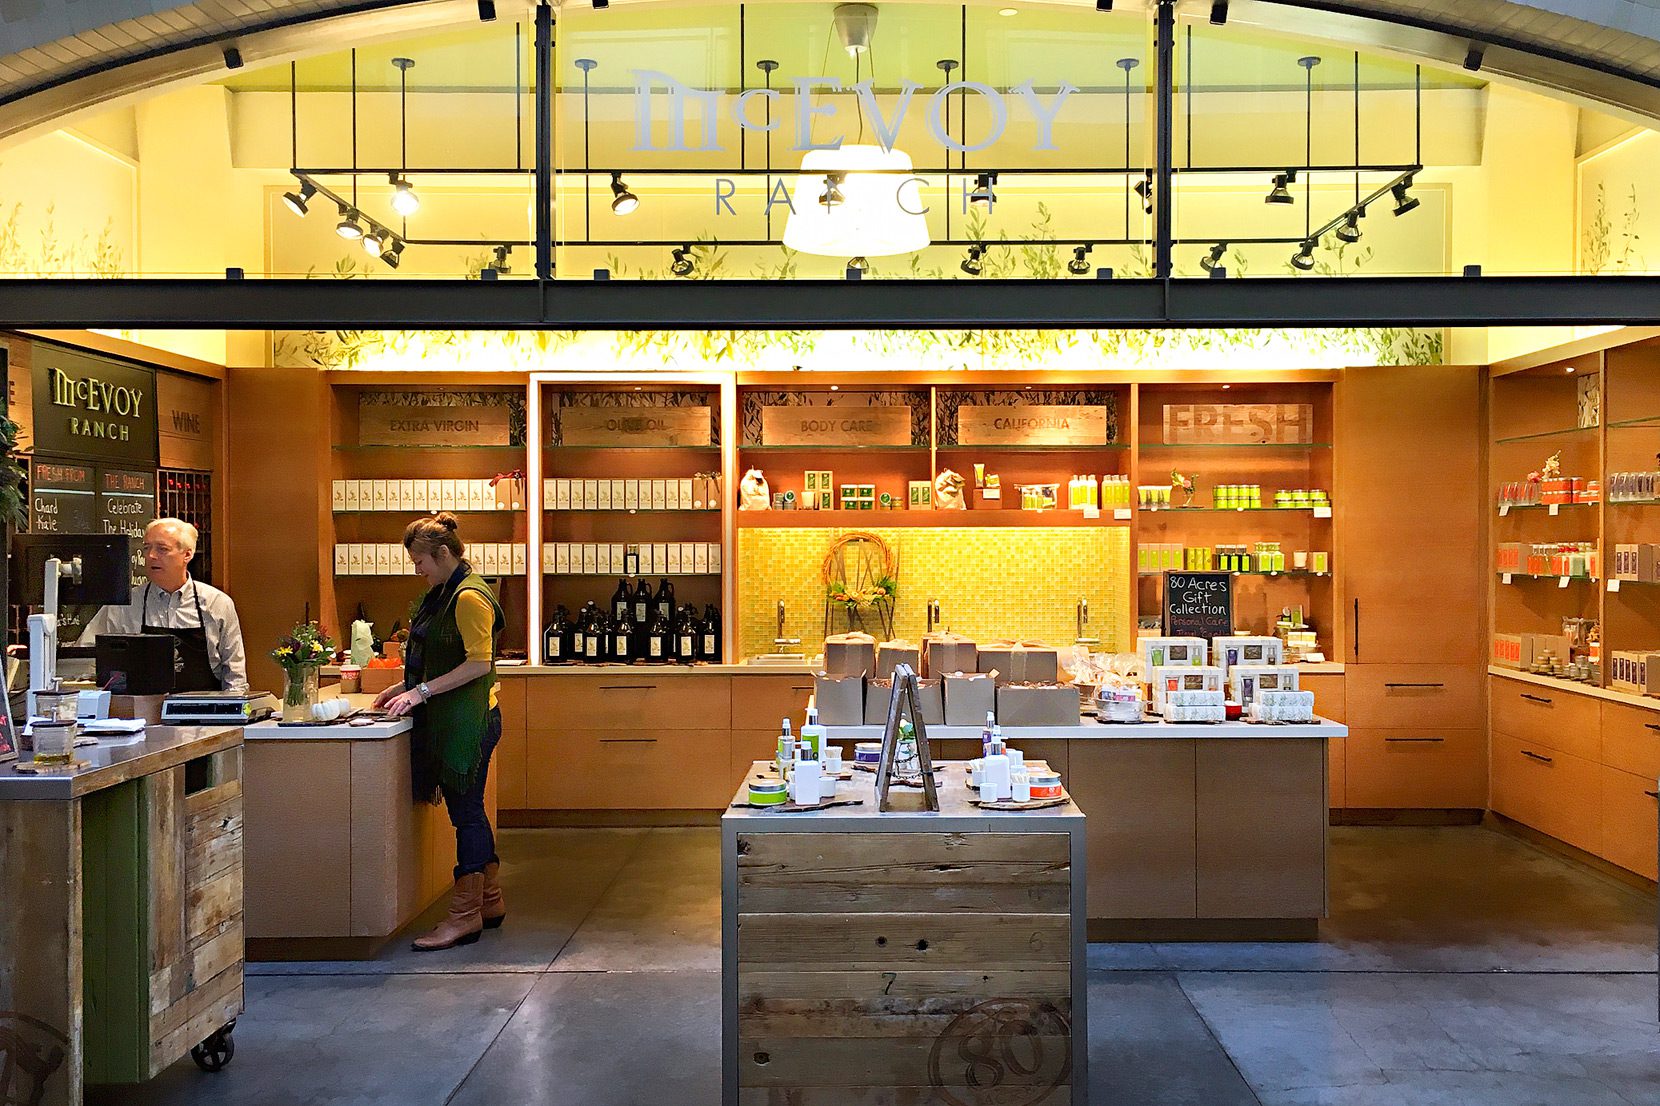 McEvoy-Ranch-Skin-Care-at-Ferry-Building-Marketplace-San-Francisco